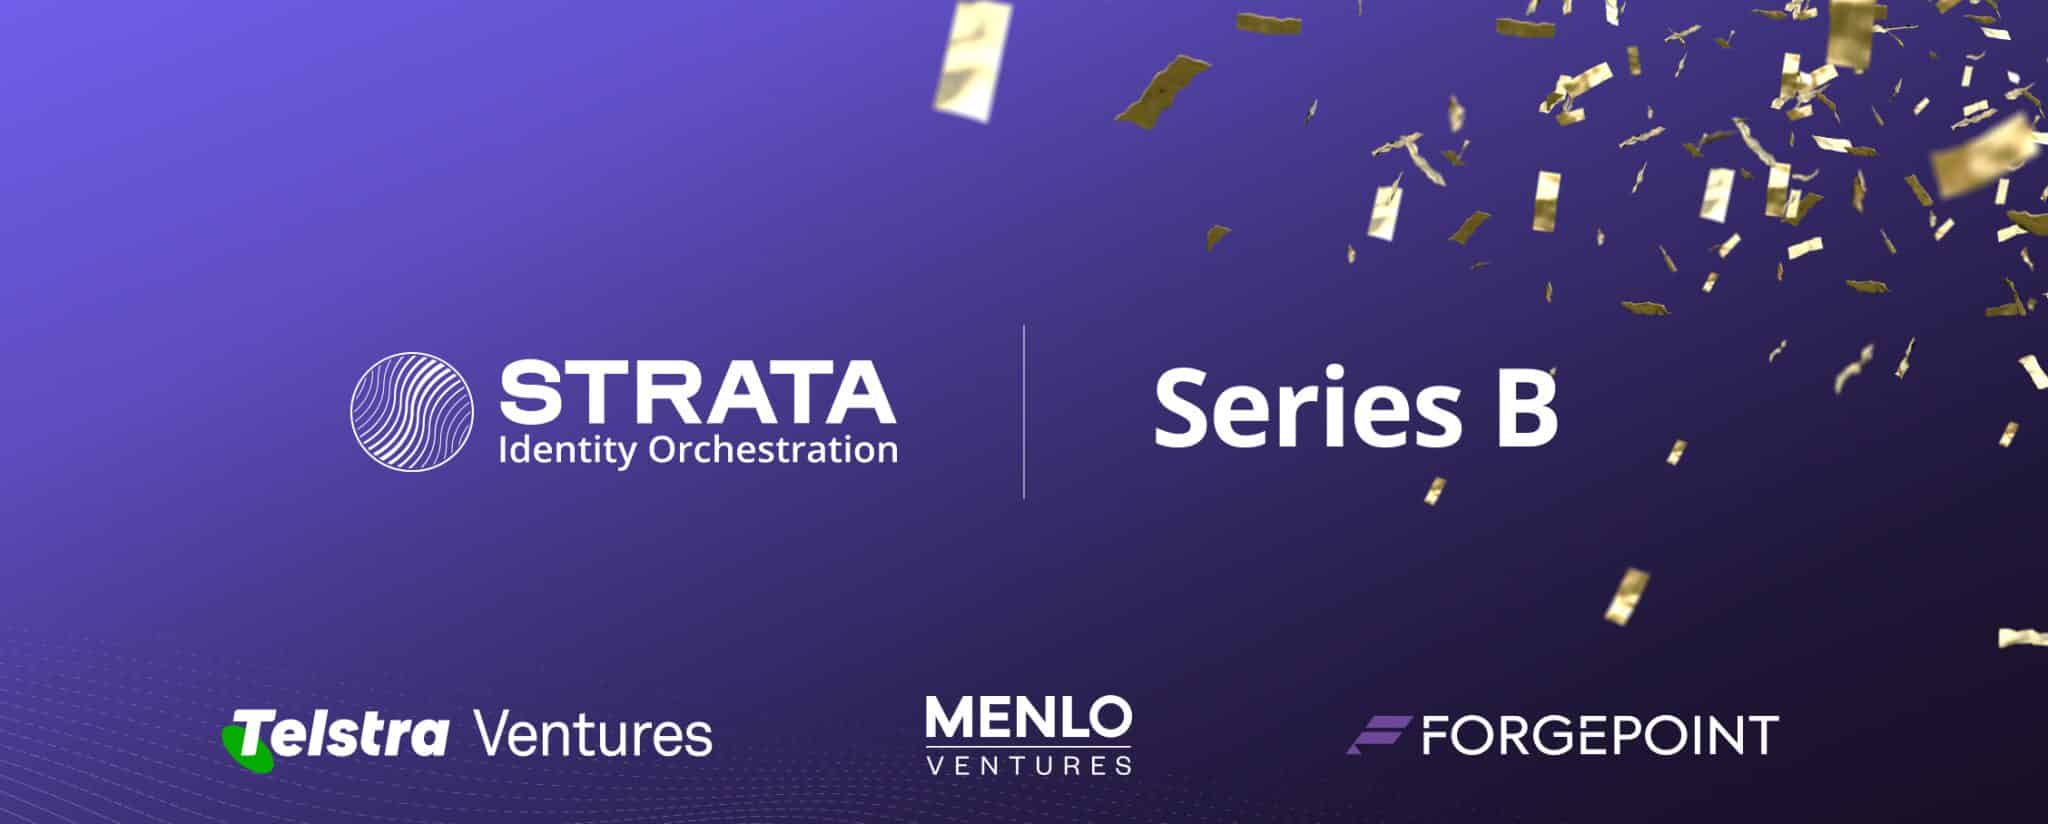 Strata Identity logo, Telstra Ventures, Menlo Forgepoint Capital logos on purple background announcing series B financing of $26 M